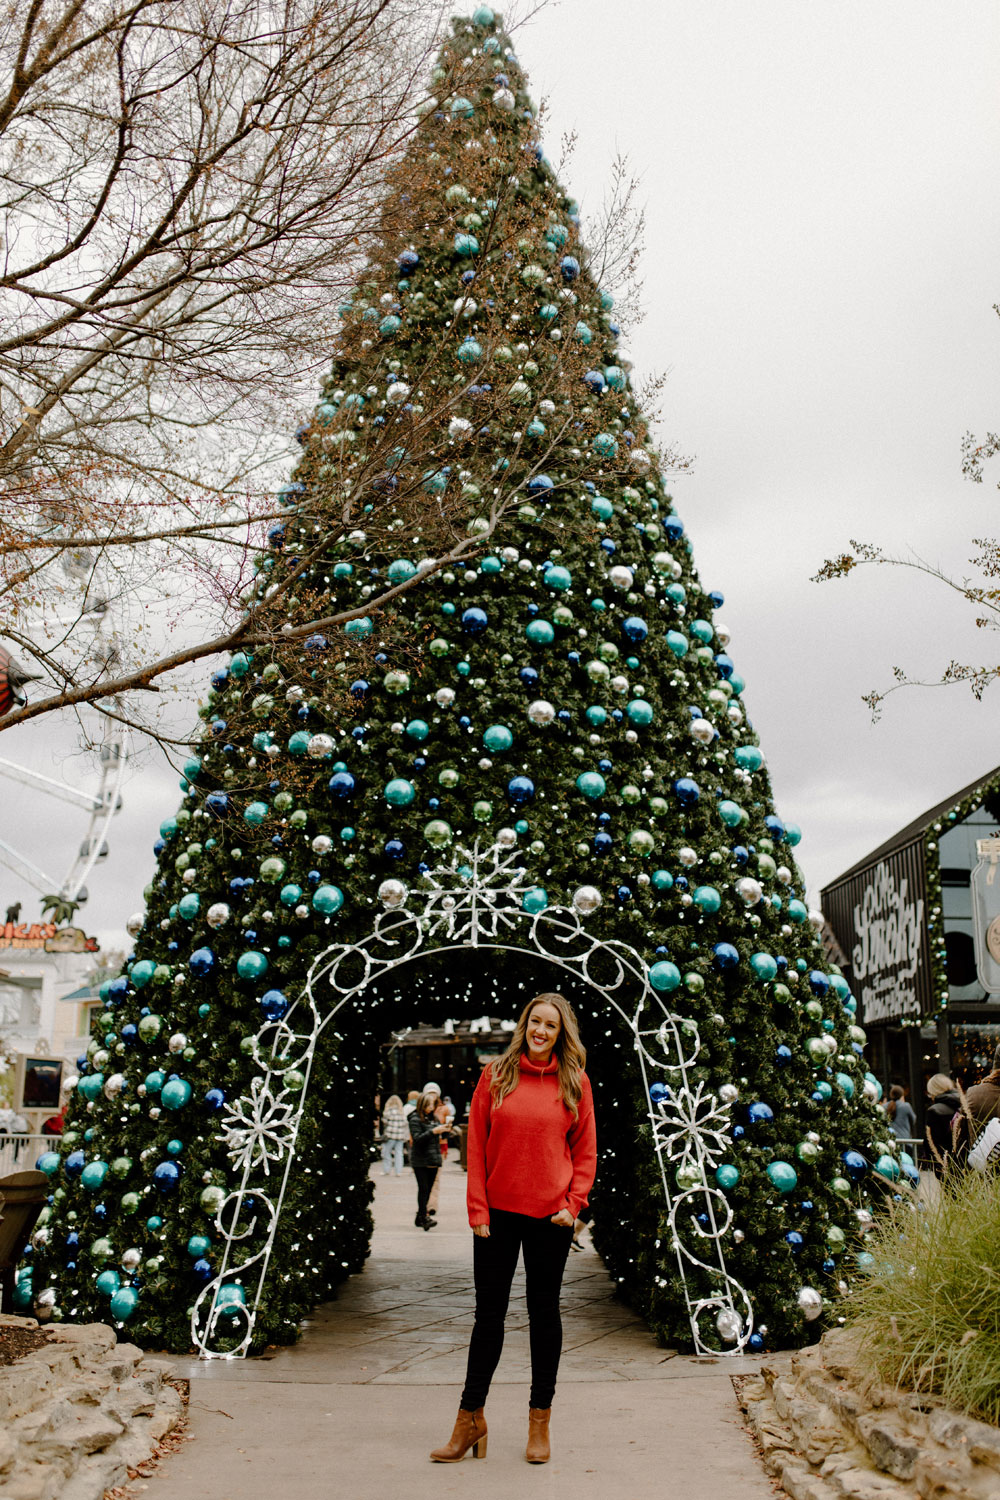 Small Town Christmas - Pigeon Forge, TN